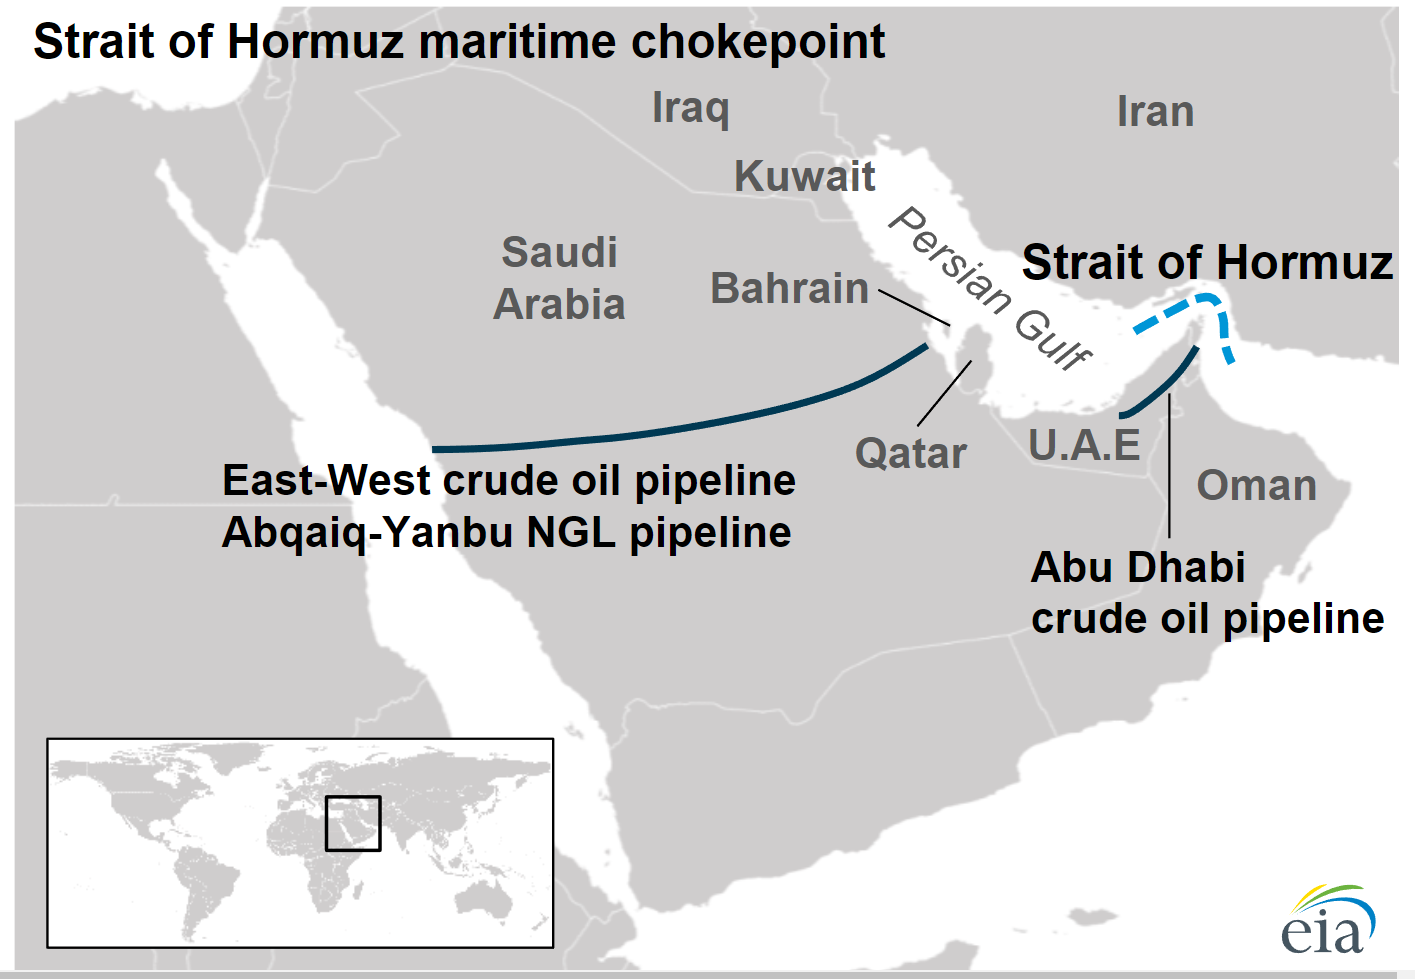 The Strait of Hormuz at Persian Gulf is the World’s most important Oil Transit Chokepoint